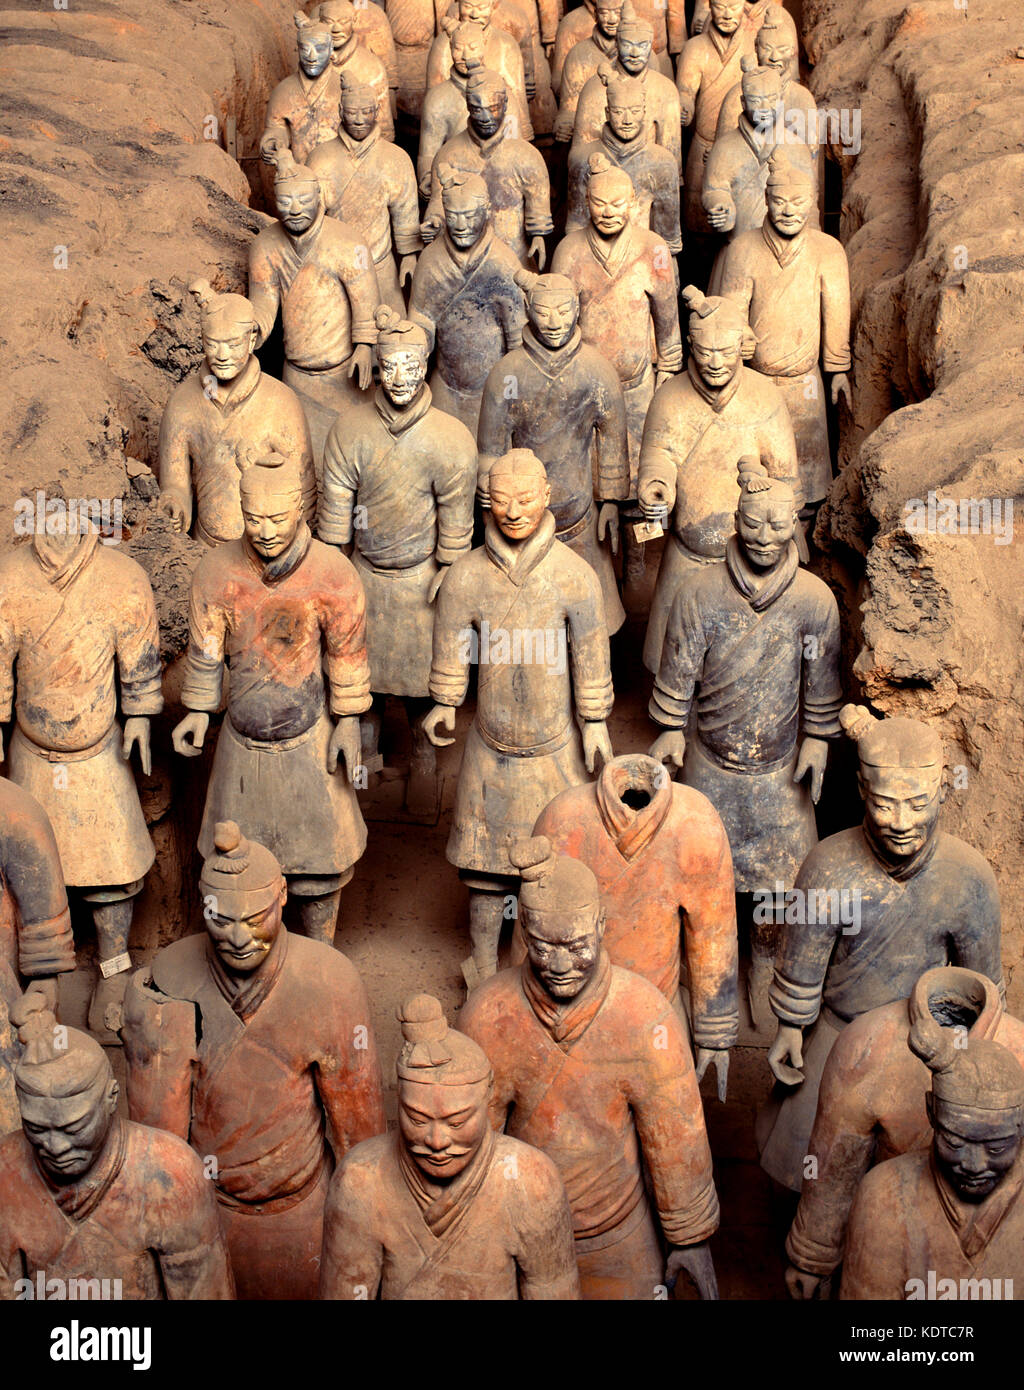 Terracotta army, Xi’an, Shaanxi Province, China Stock Photo